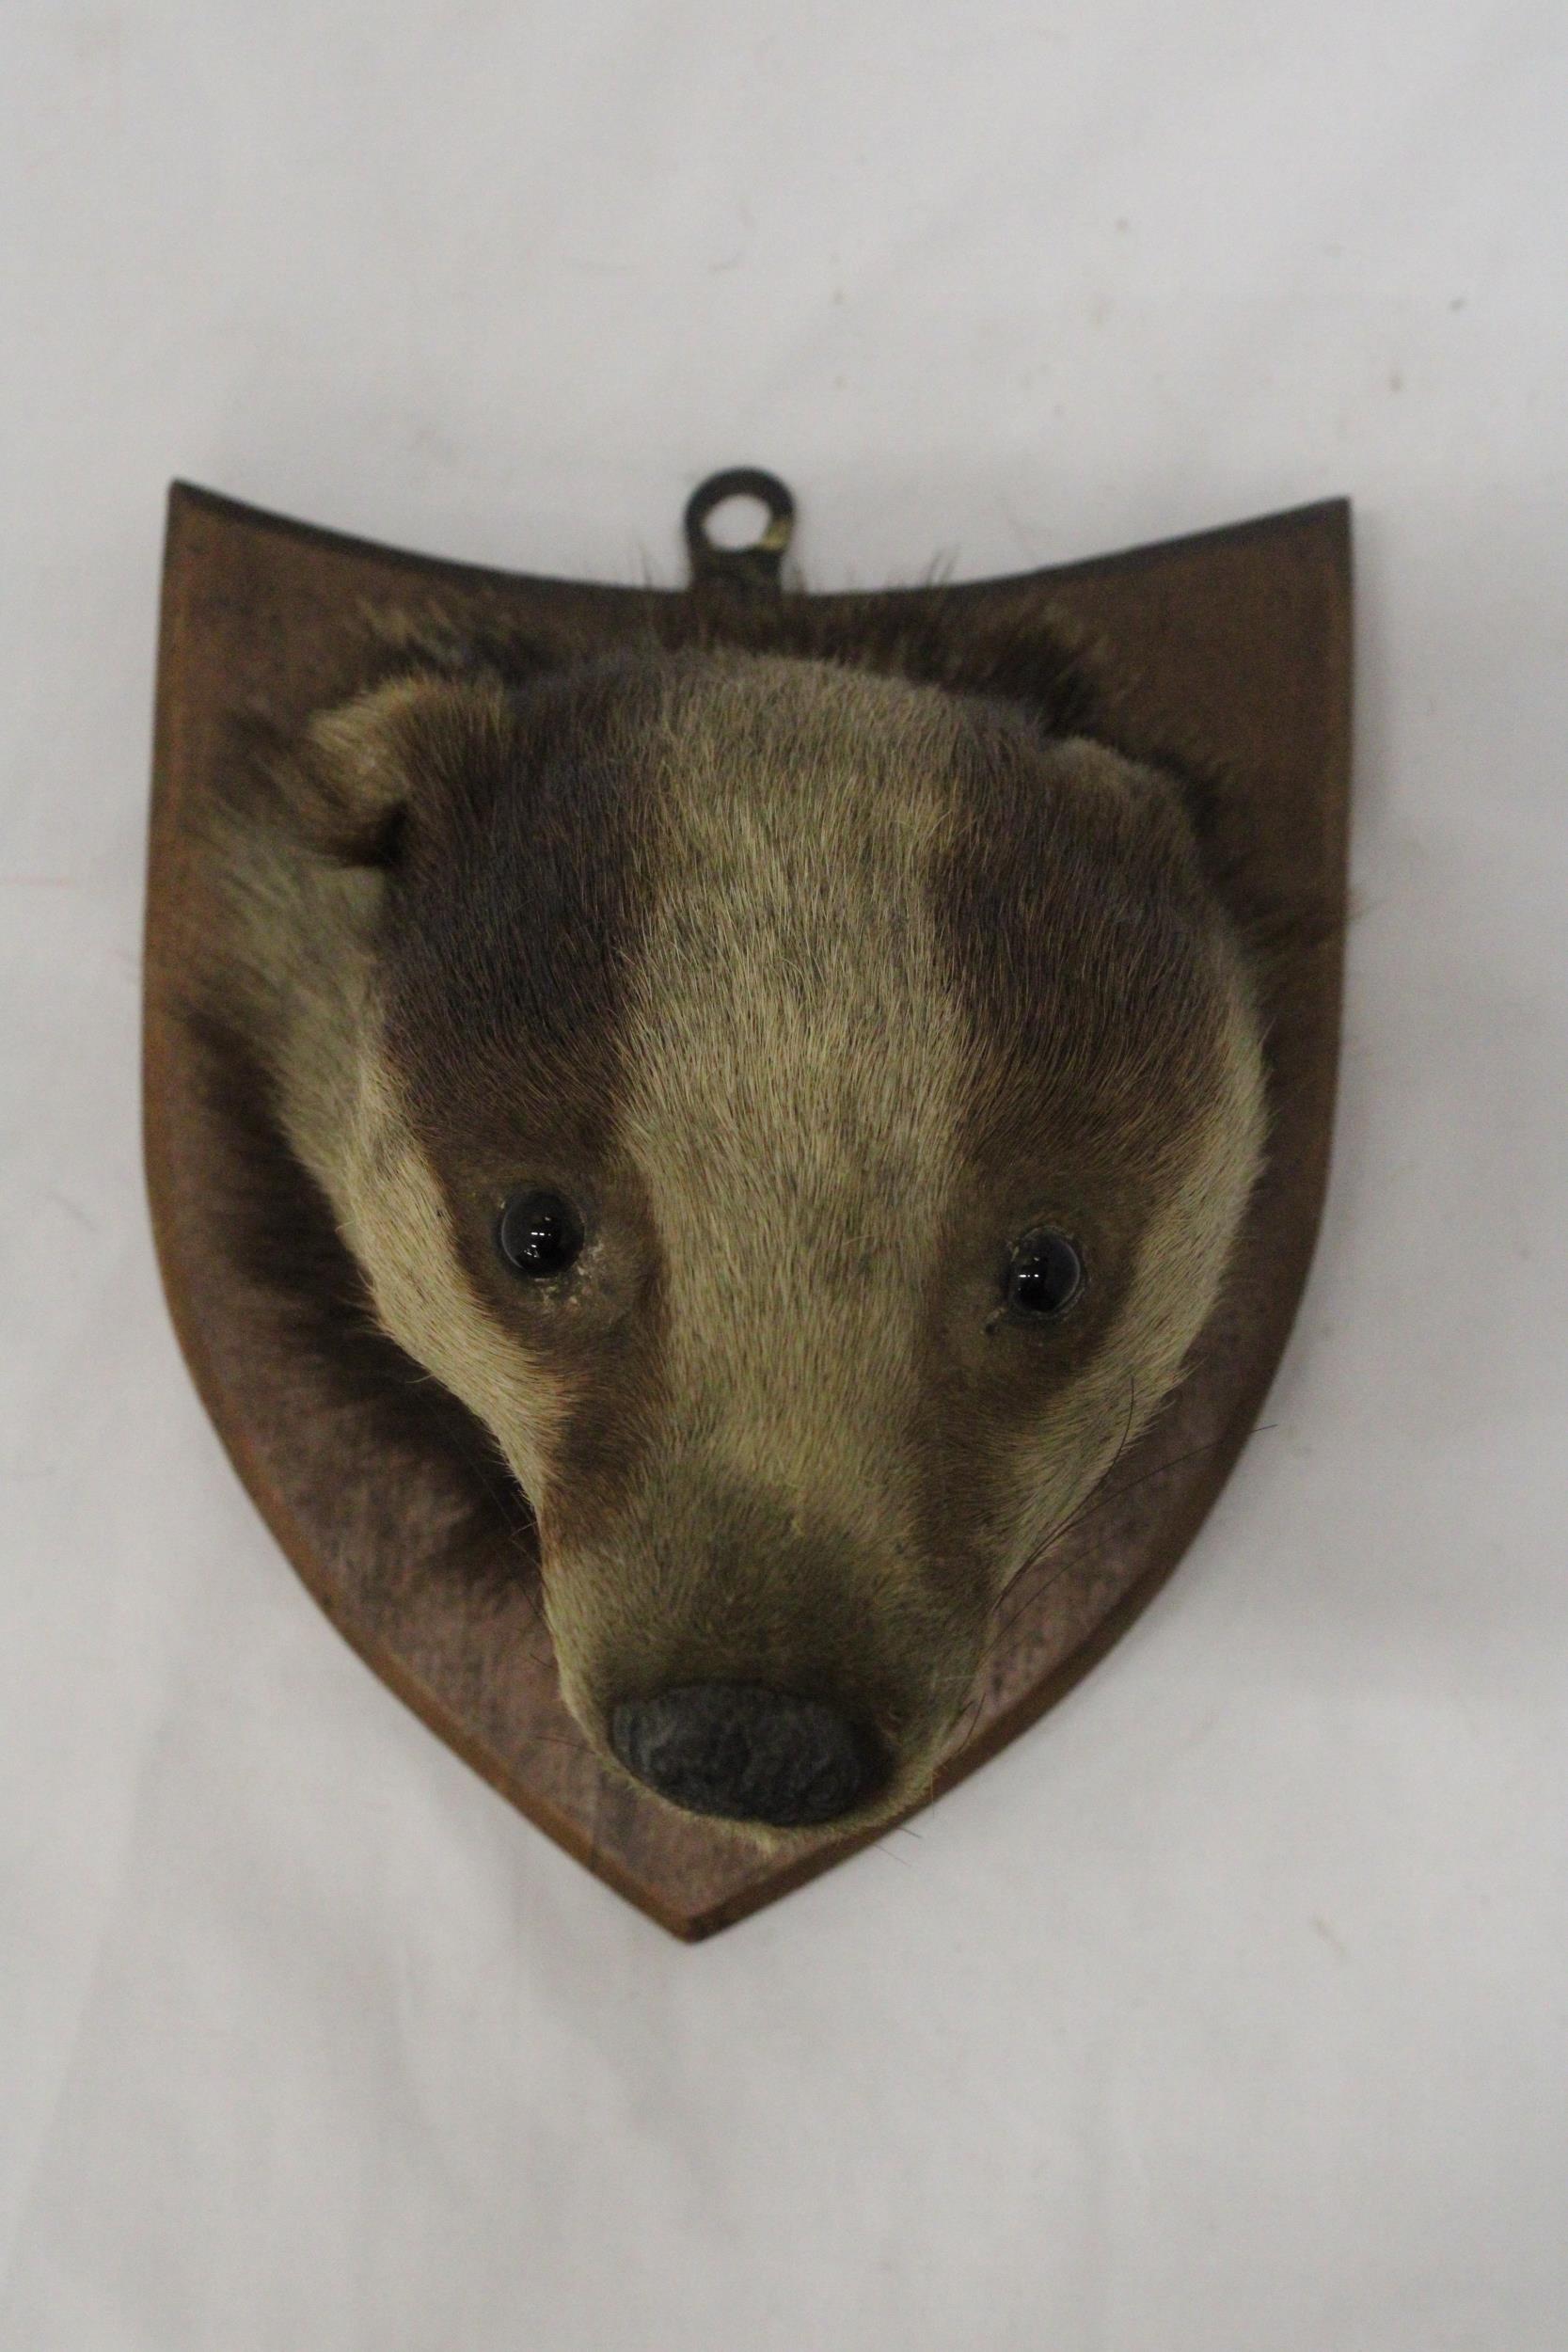 A TAXIDERMY OF A BADGER HEAD ON A SHIELD SHAPED WOODEN PLINTH - Image 2 of 6